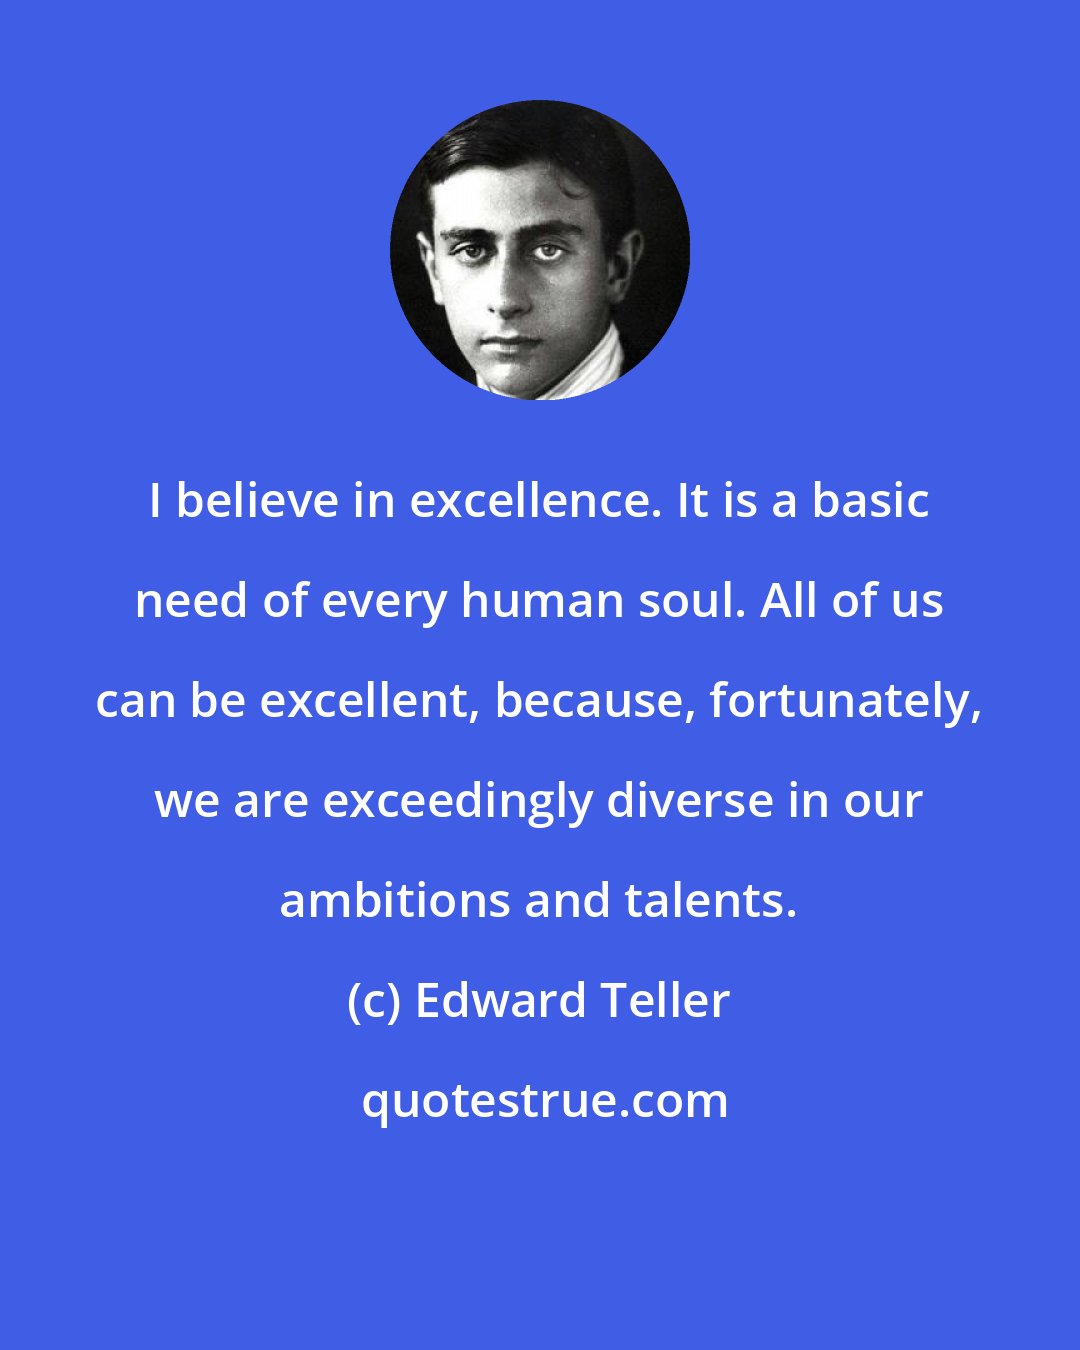 Edward Teller: I believe in excellence. It is a basic need of every human soul. All of us can be excellent, because, fortunately, we are exceedingly diverse in our ambitions and talents.